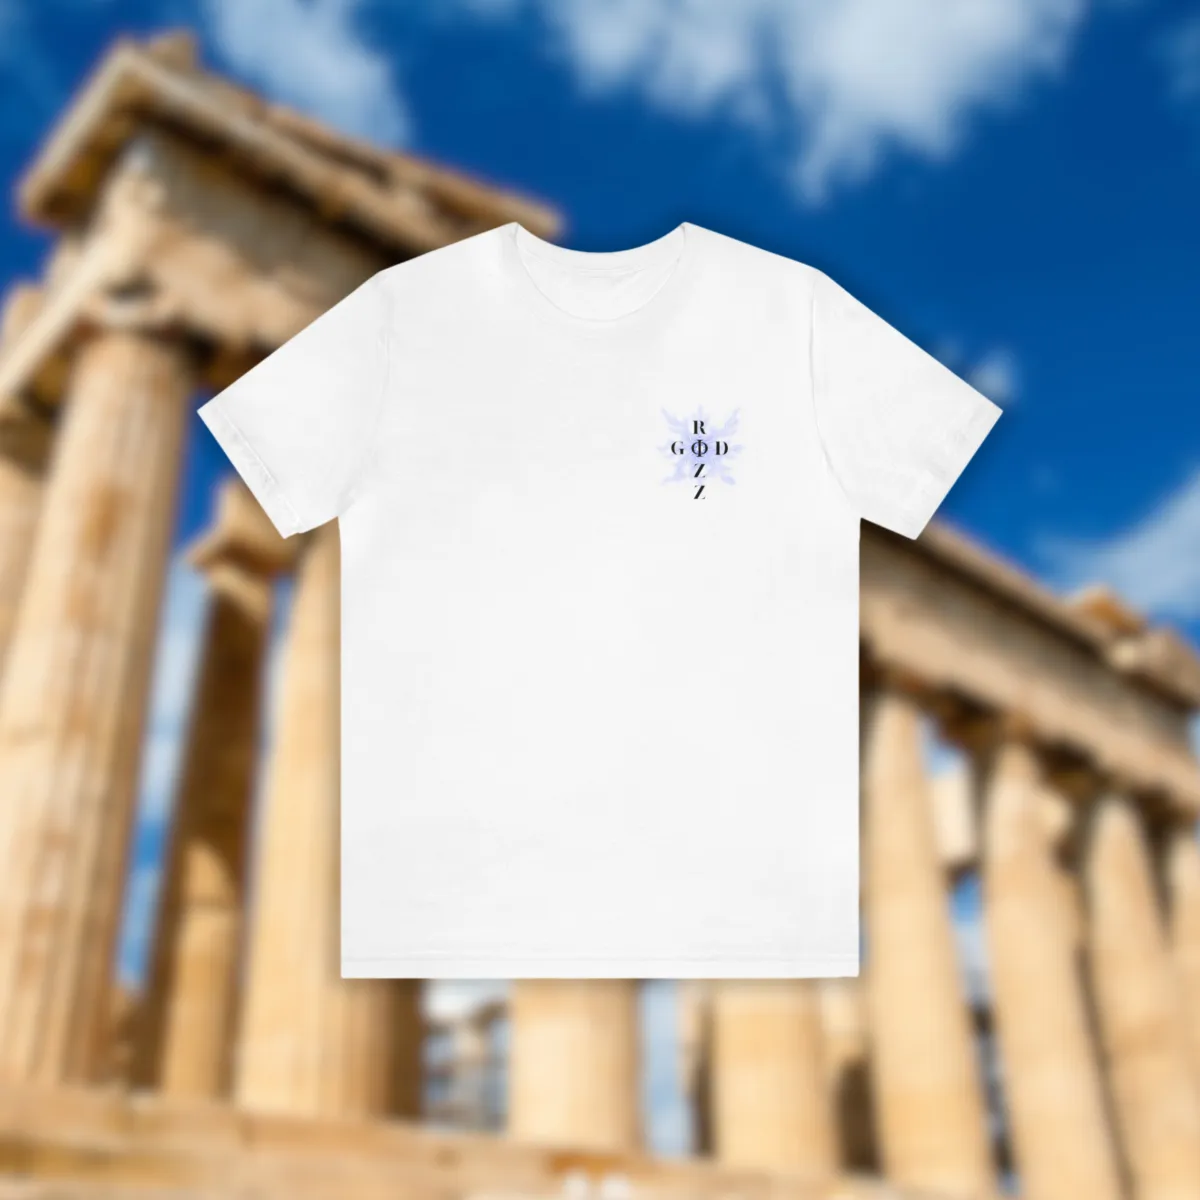 White tee with Rizz God V1 front off center design in front of Greek ruins